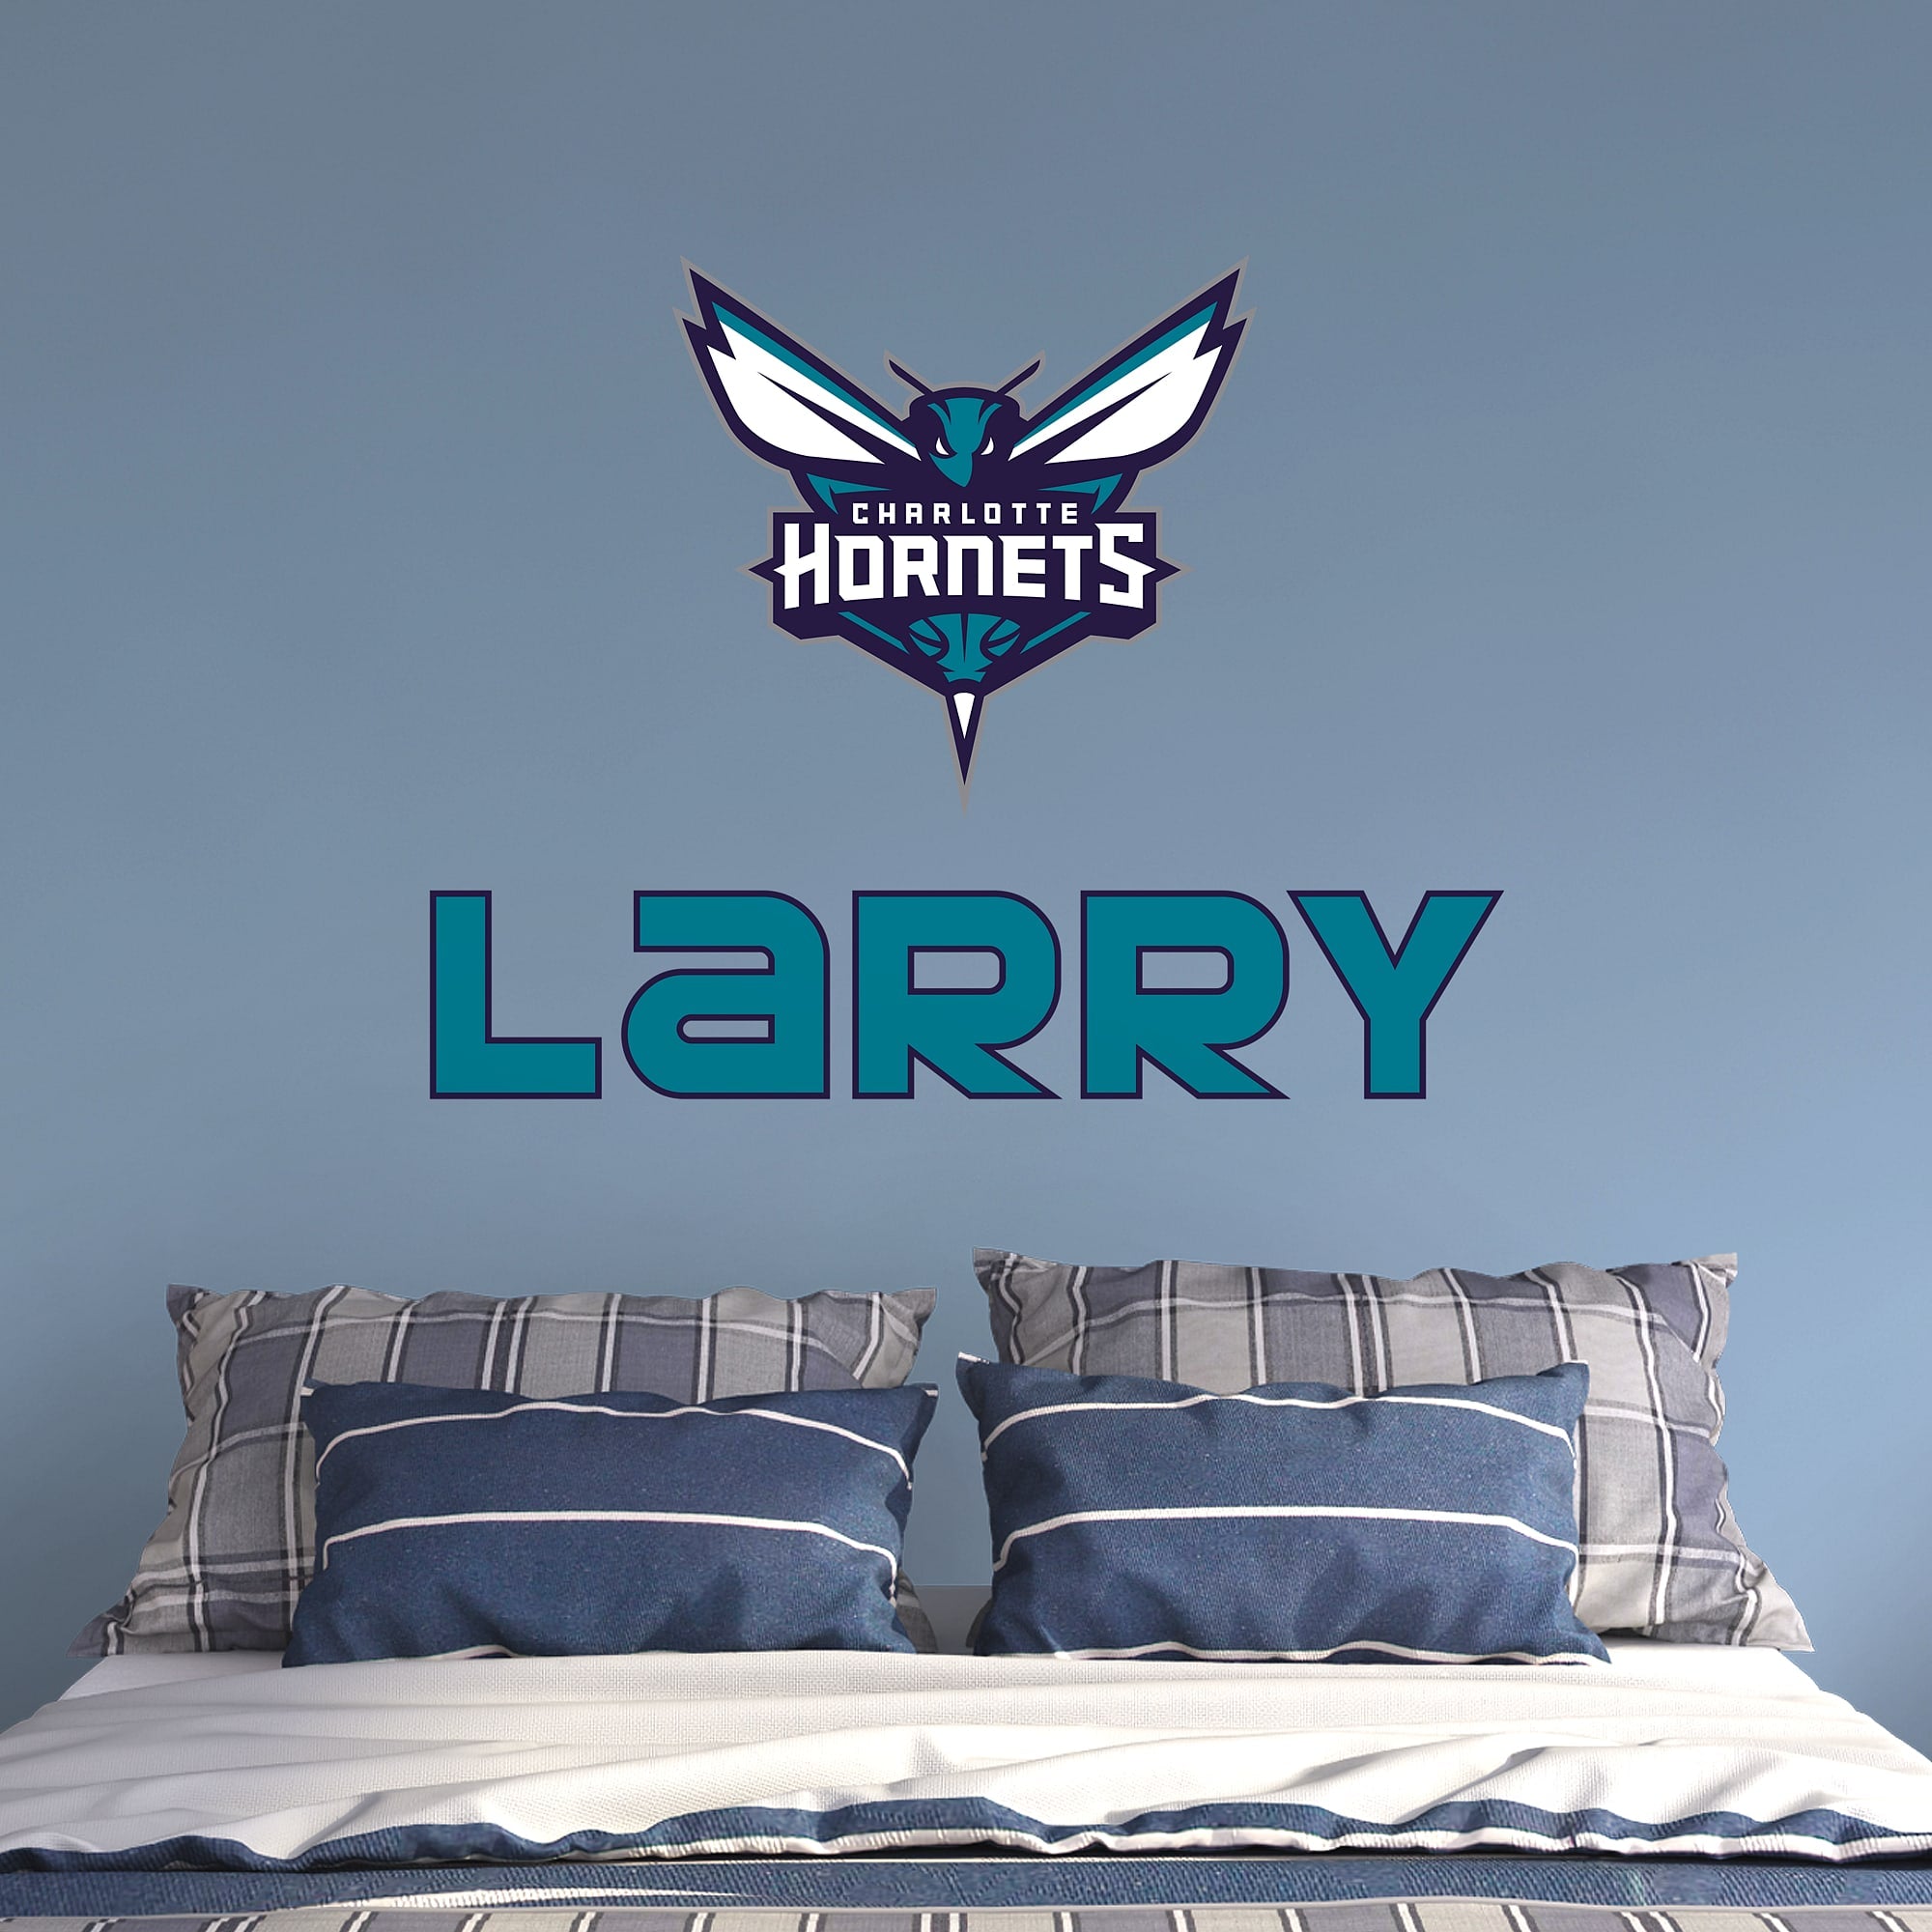 Charlotte Hornets: Stacked Personalized Name - Officially Licensed NBA Transfer Decal in Teal (52"W x 39.5"H) by Fathead | Vinyl